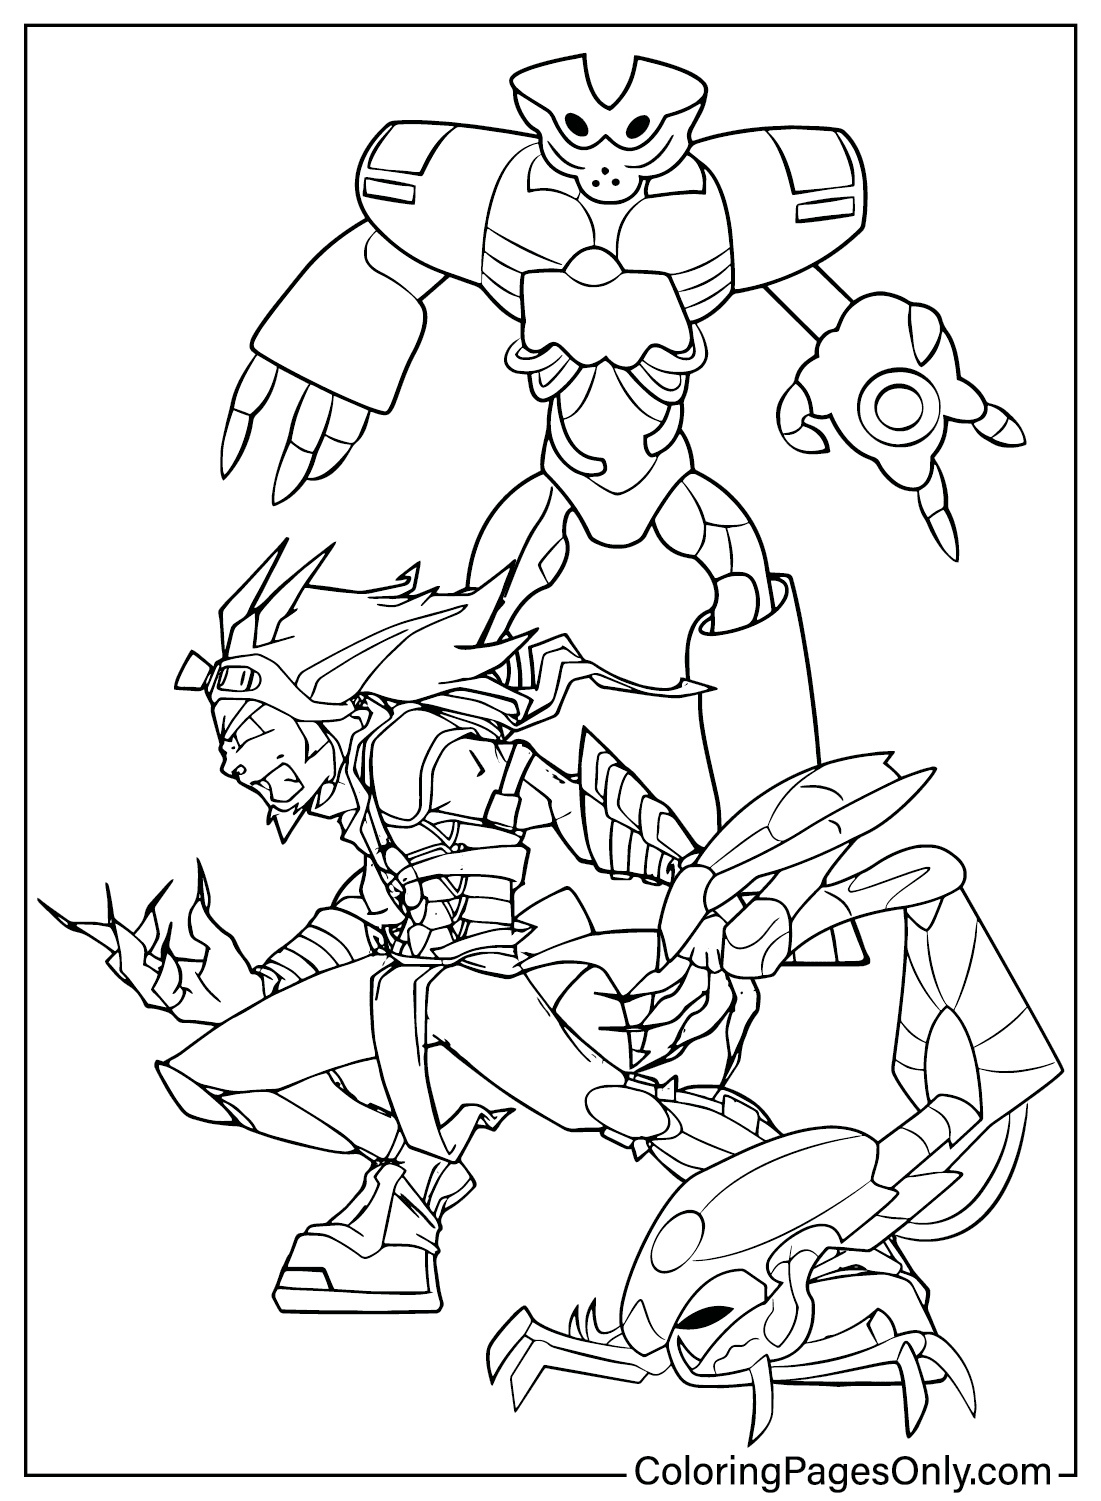 Jak and Daxter Coloring Page for Adults from Jak and Daxter